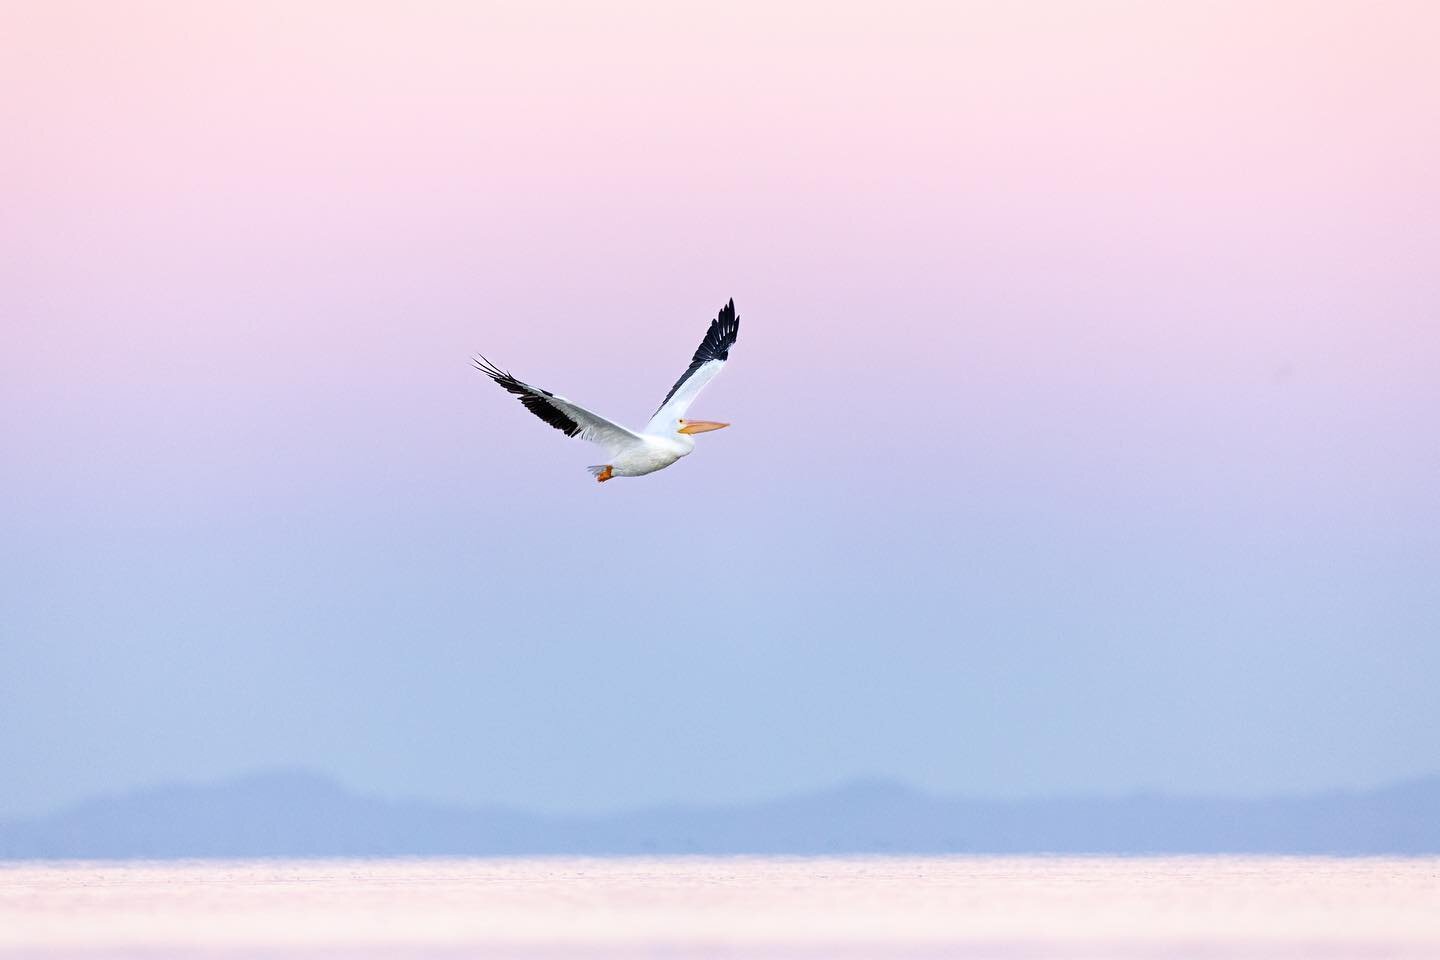 Pelican sunrise at Great Salt Lake. On clear mornings sometimes we get an intense pink, purple and blue ombr&eacute; over the lake before the sun comes up over the Wasatch mountains. But it&rsquo;s more about the quality of light than the color. It&r